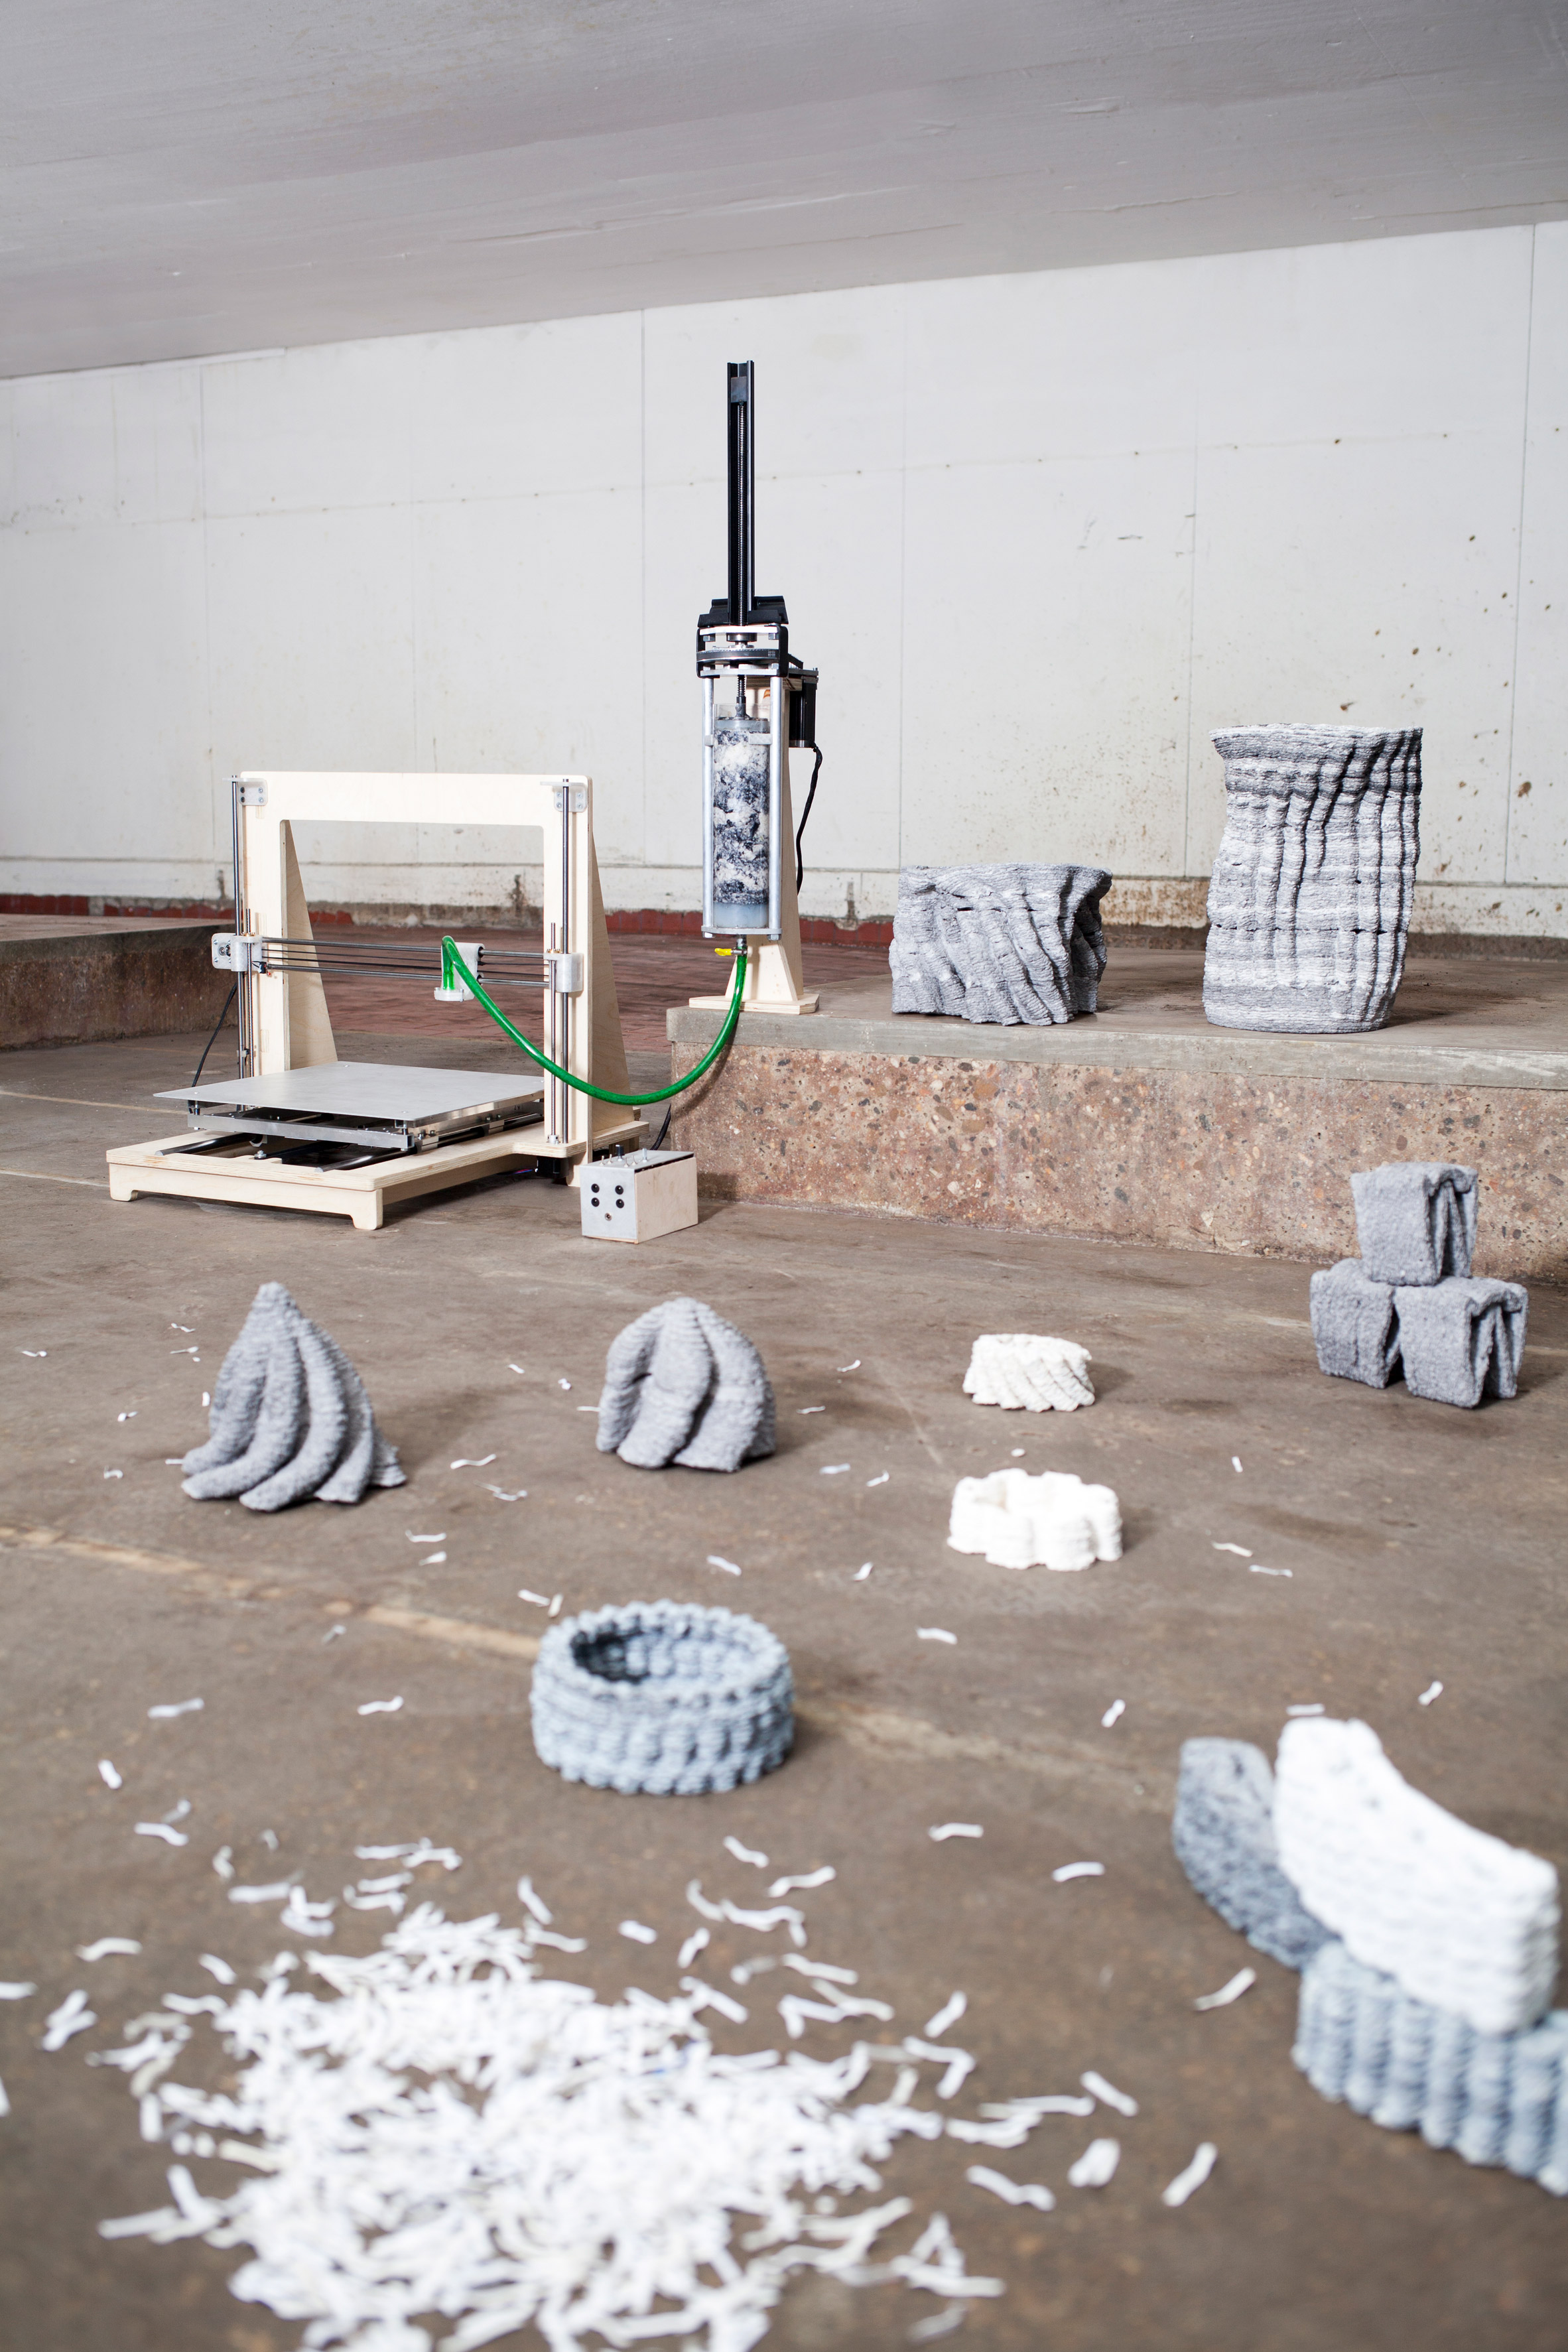 Beer Holthuis designs 3D printer that uses recycled paper